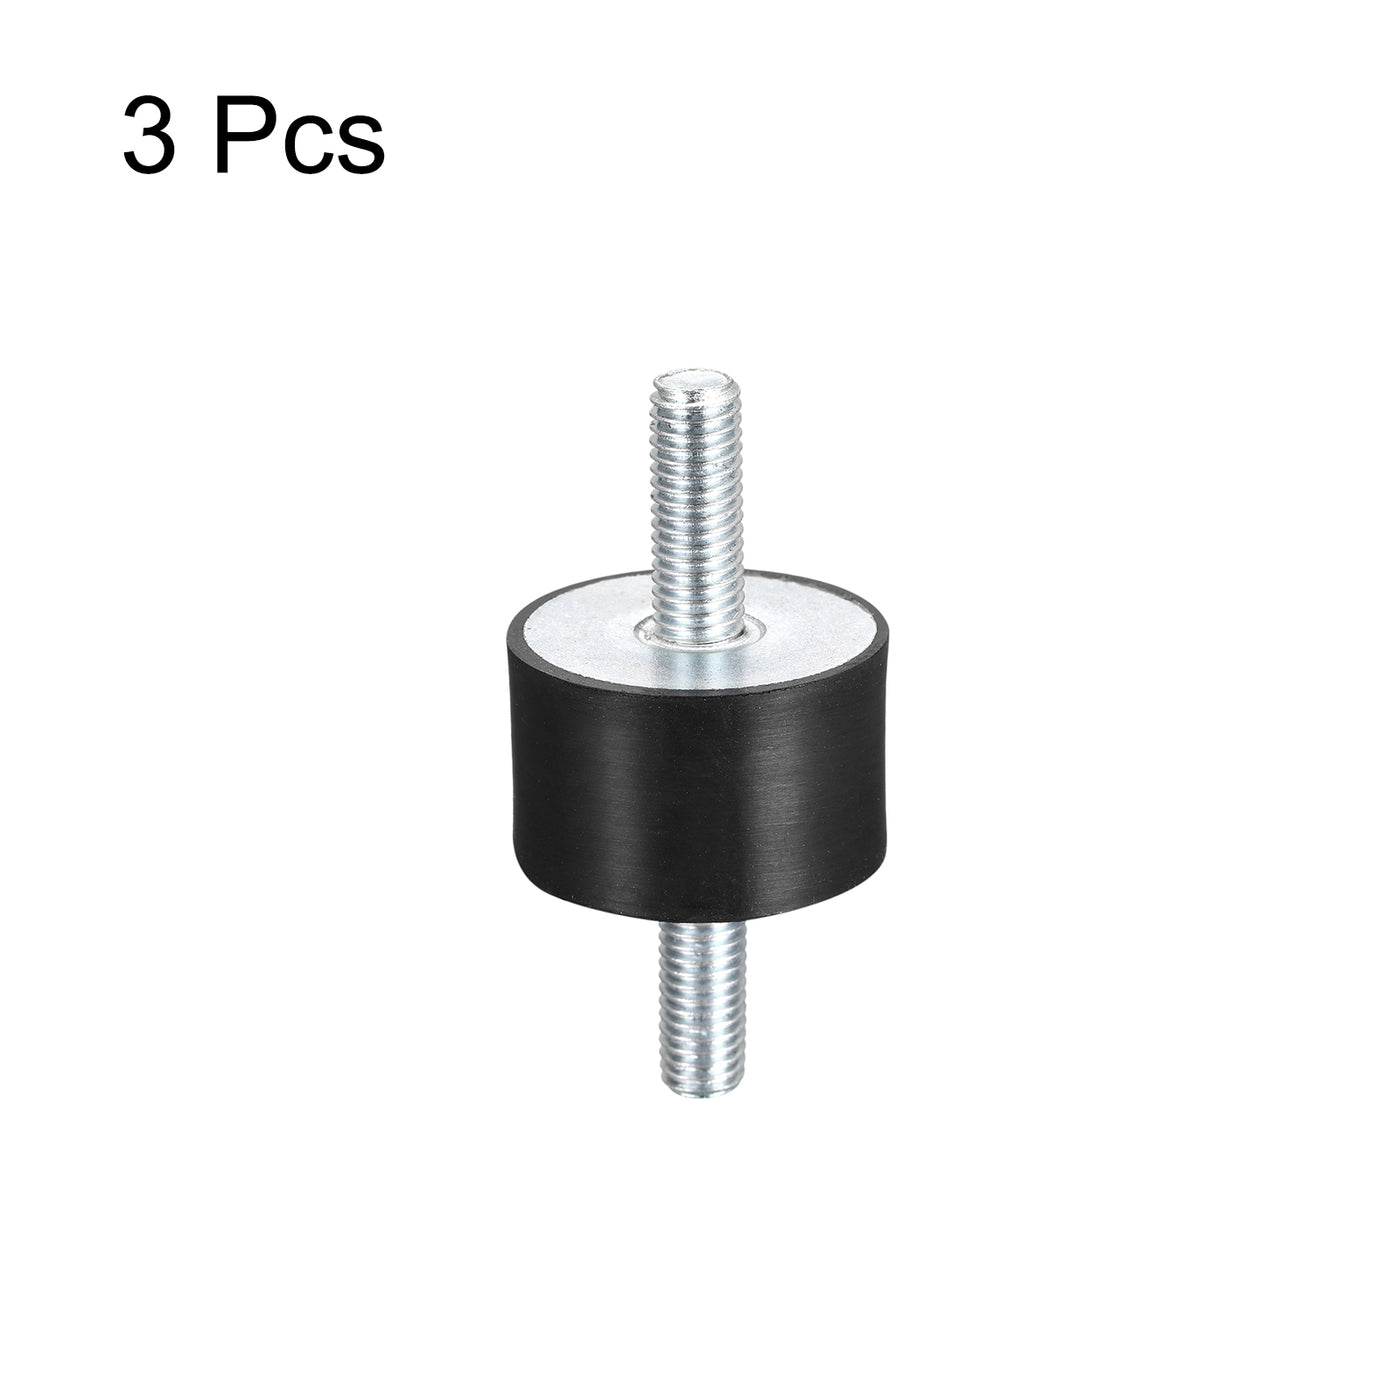 uxcell Uxcell Rubber Mounts 3pcs M10x28mm Male Vibration Isolator Shock Absorber D40mmxH25mm